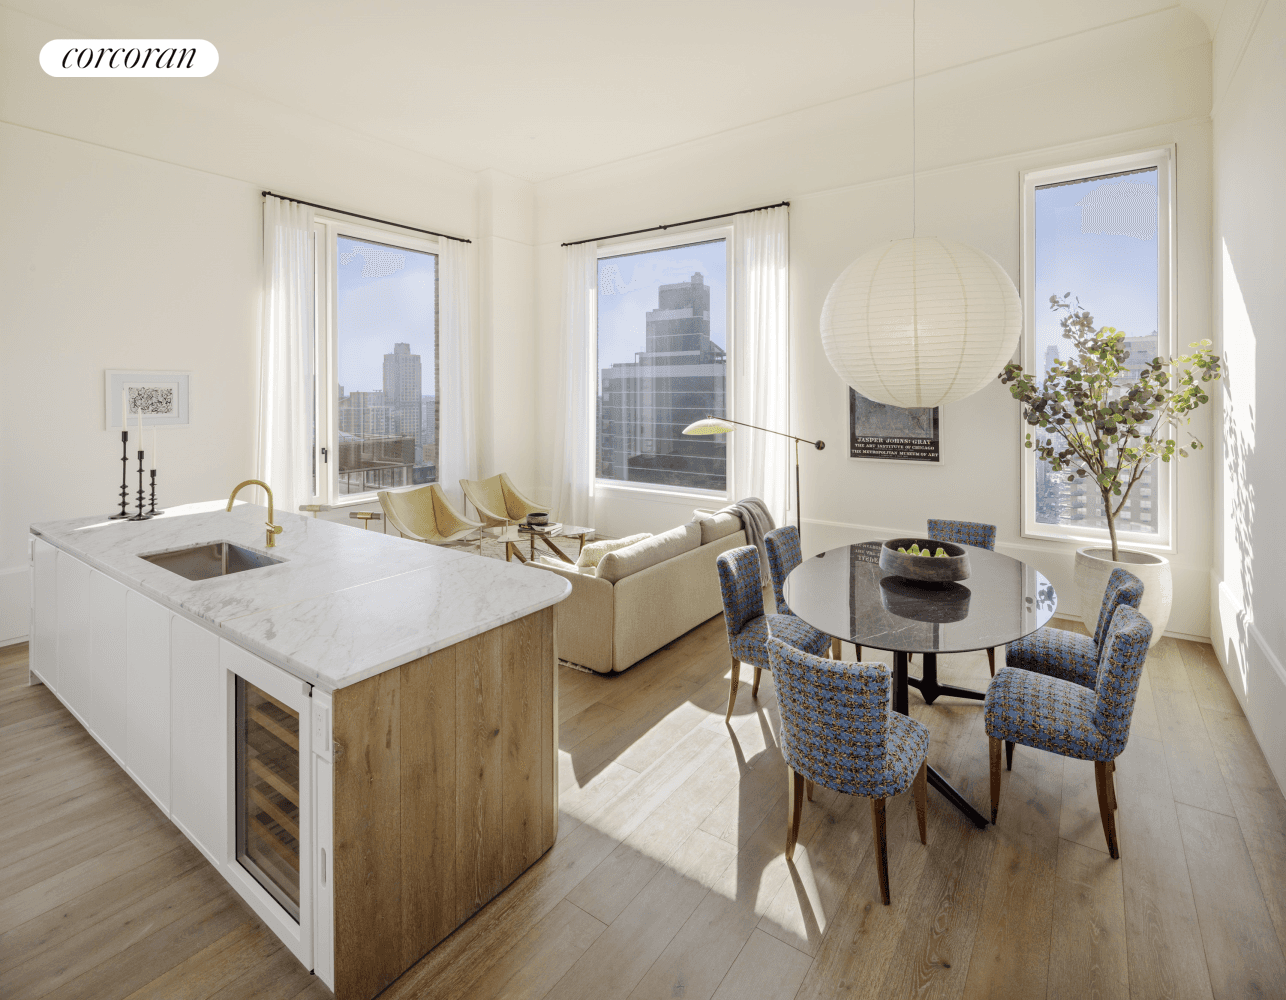 Residence 34A at 180 E. 88th Street captivates alluring views to the south, east and north from elevated heights.